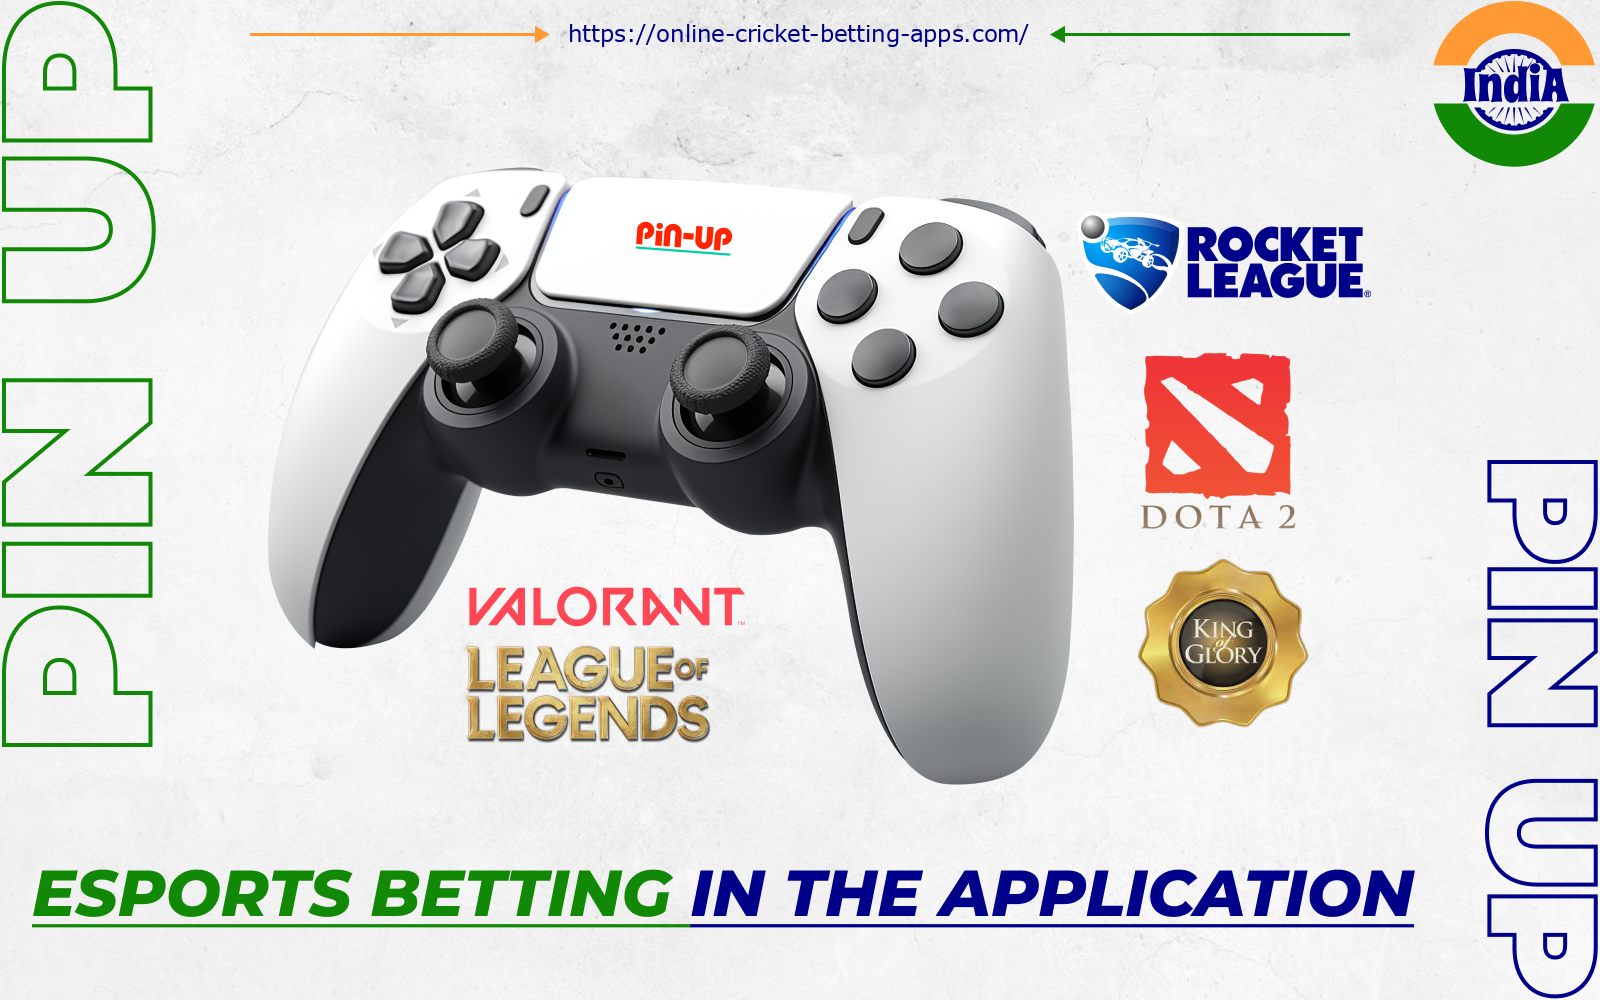 After downloading the Pinup app, Indians can bet on all popular cyber sports disciplines